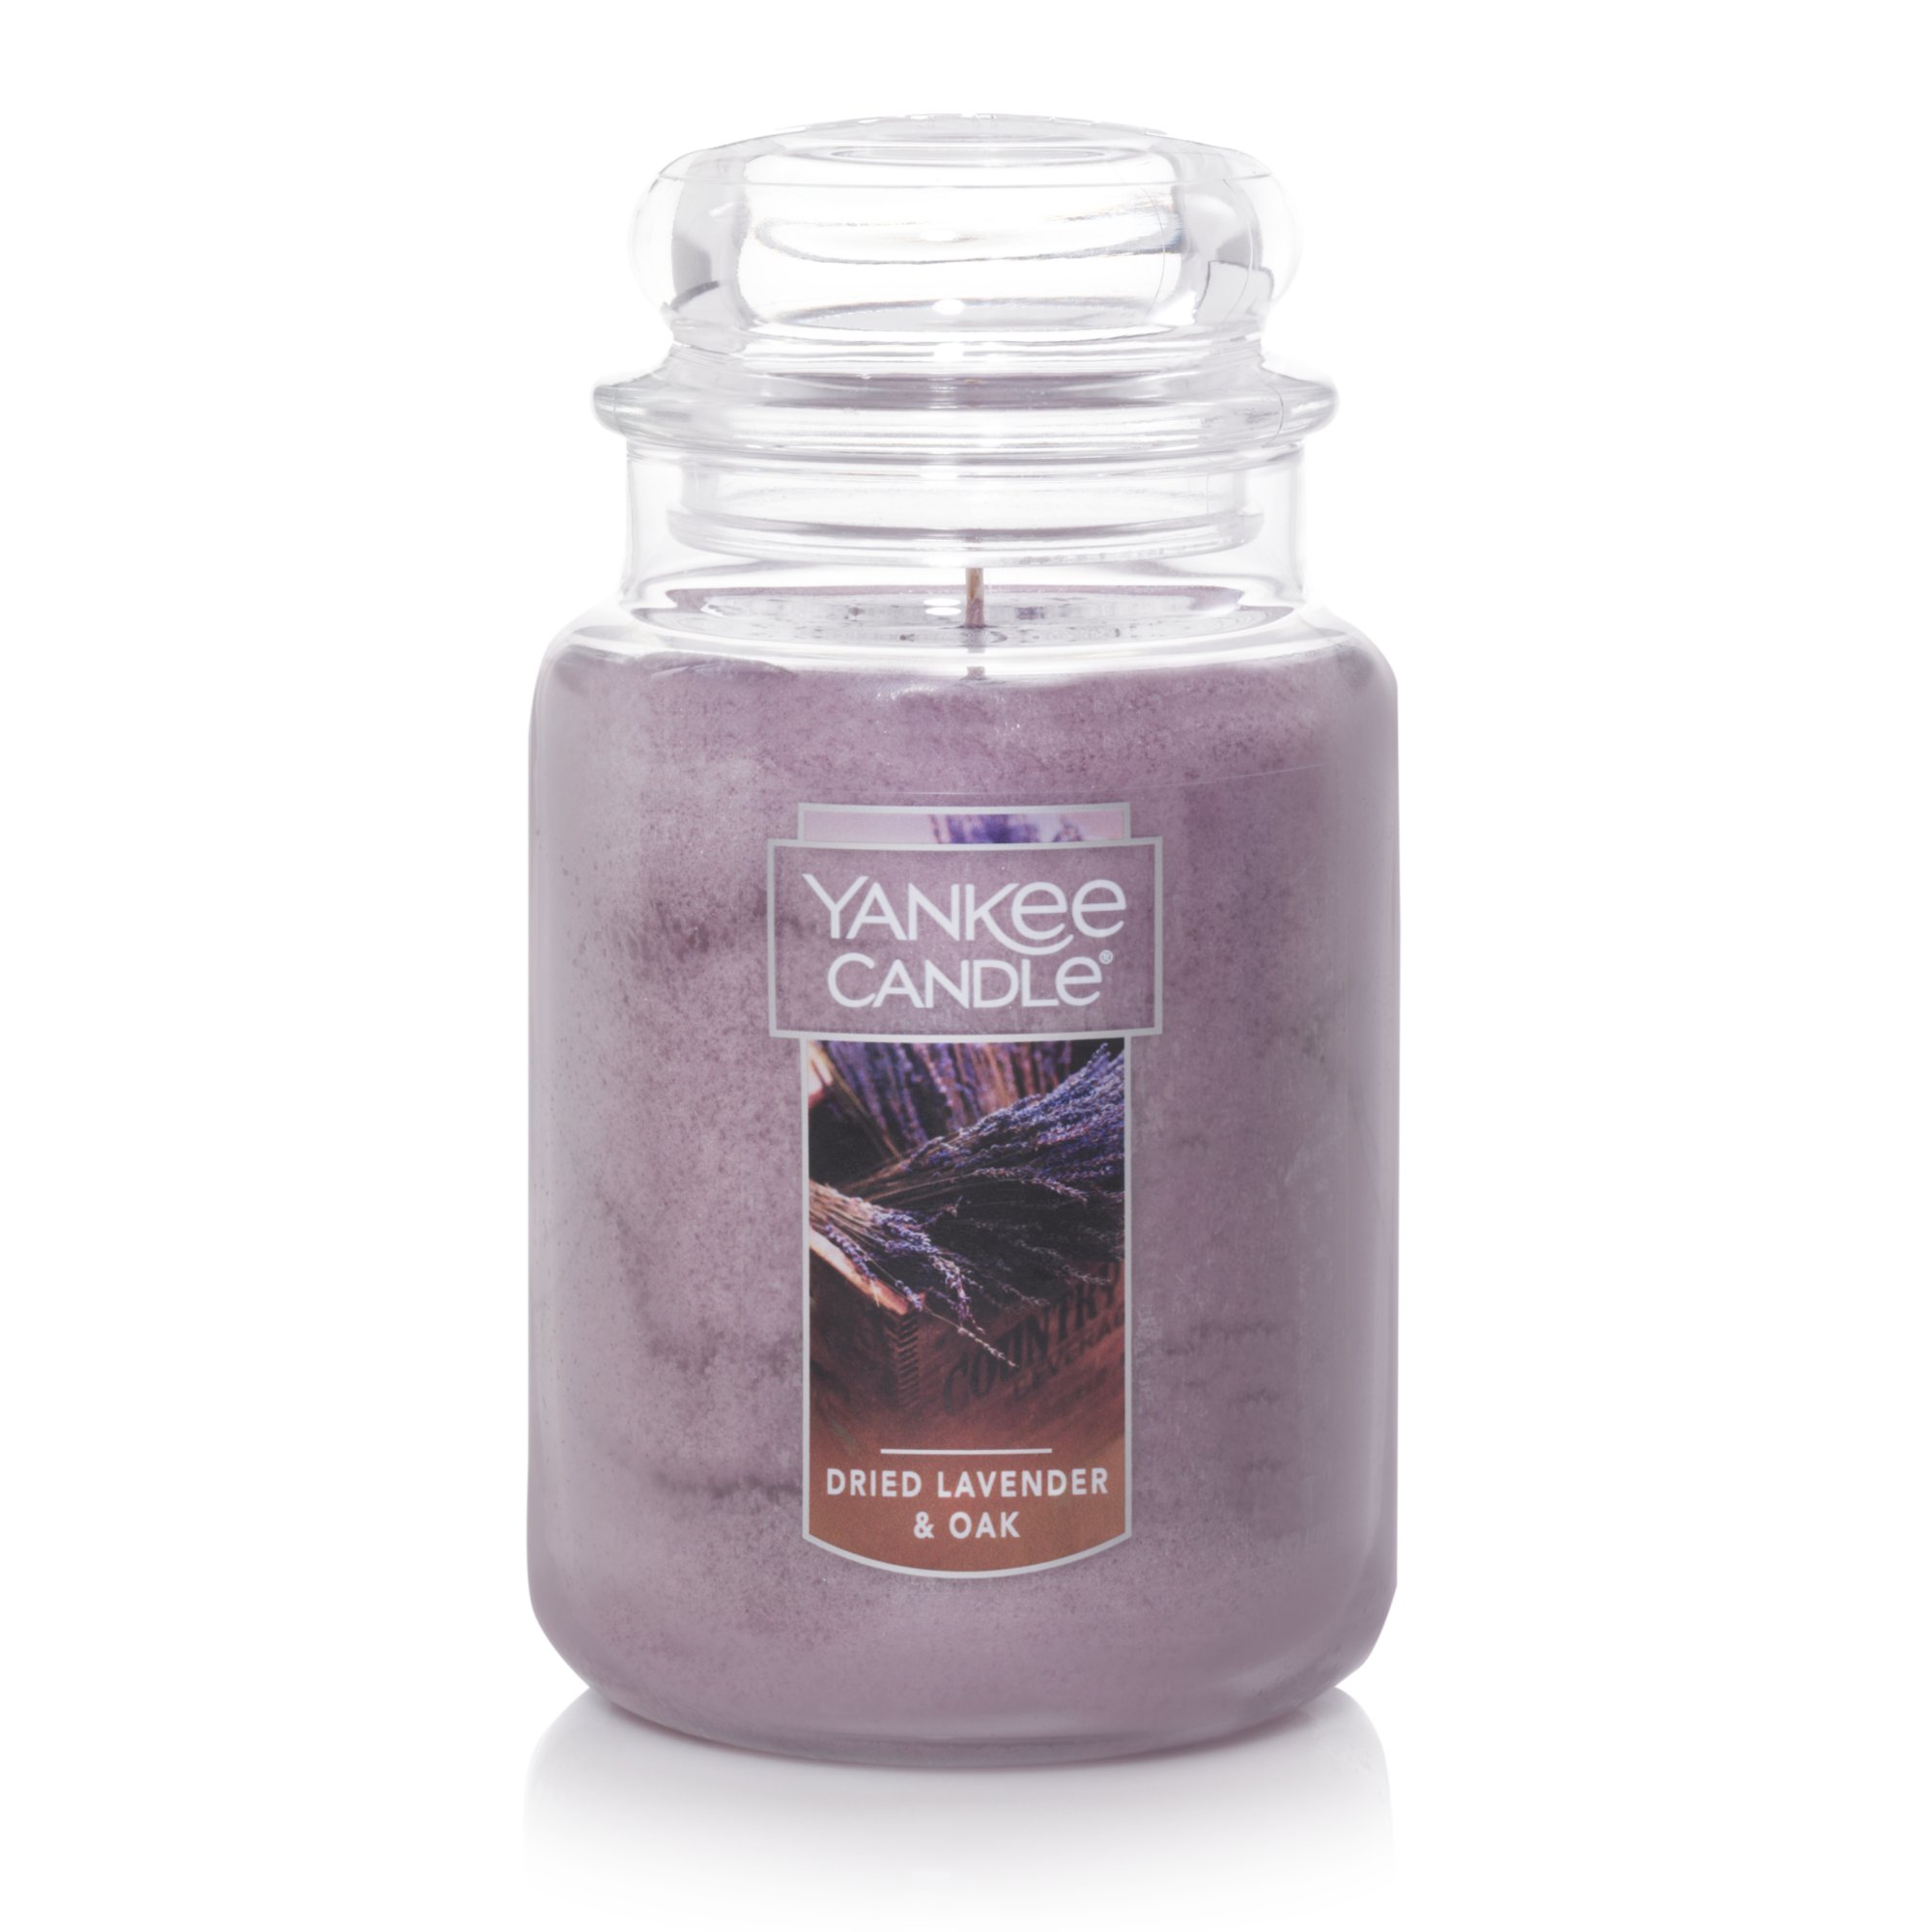 Yankee Candle Candle, Dried Lavender & Oak - 1 candle, 22 oz